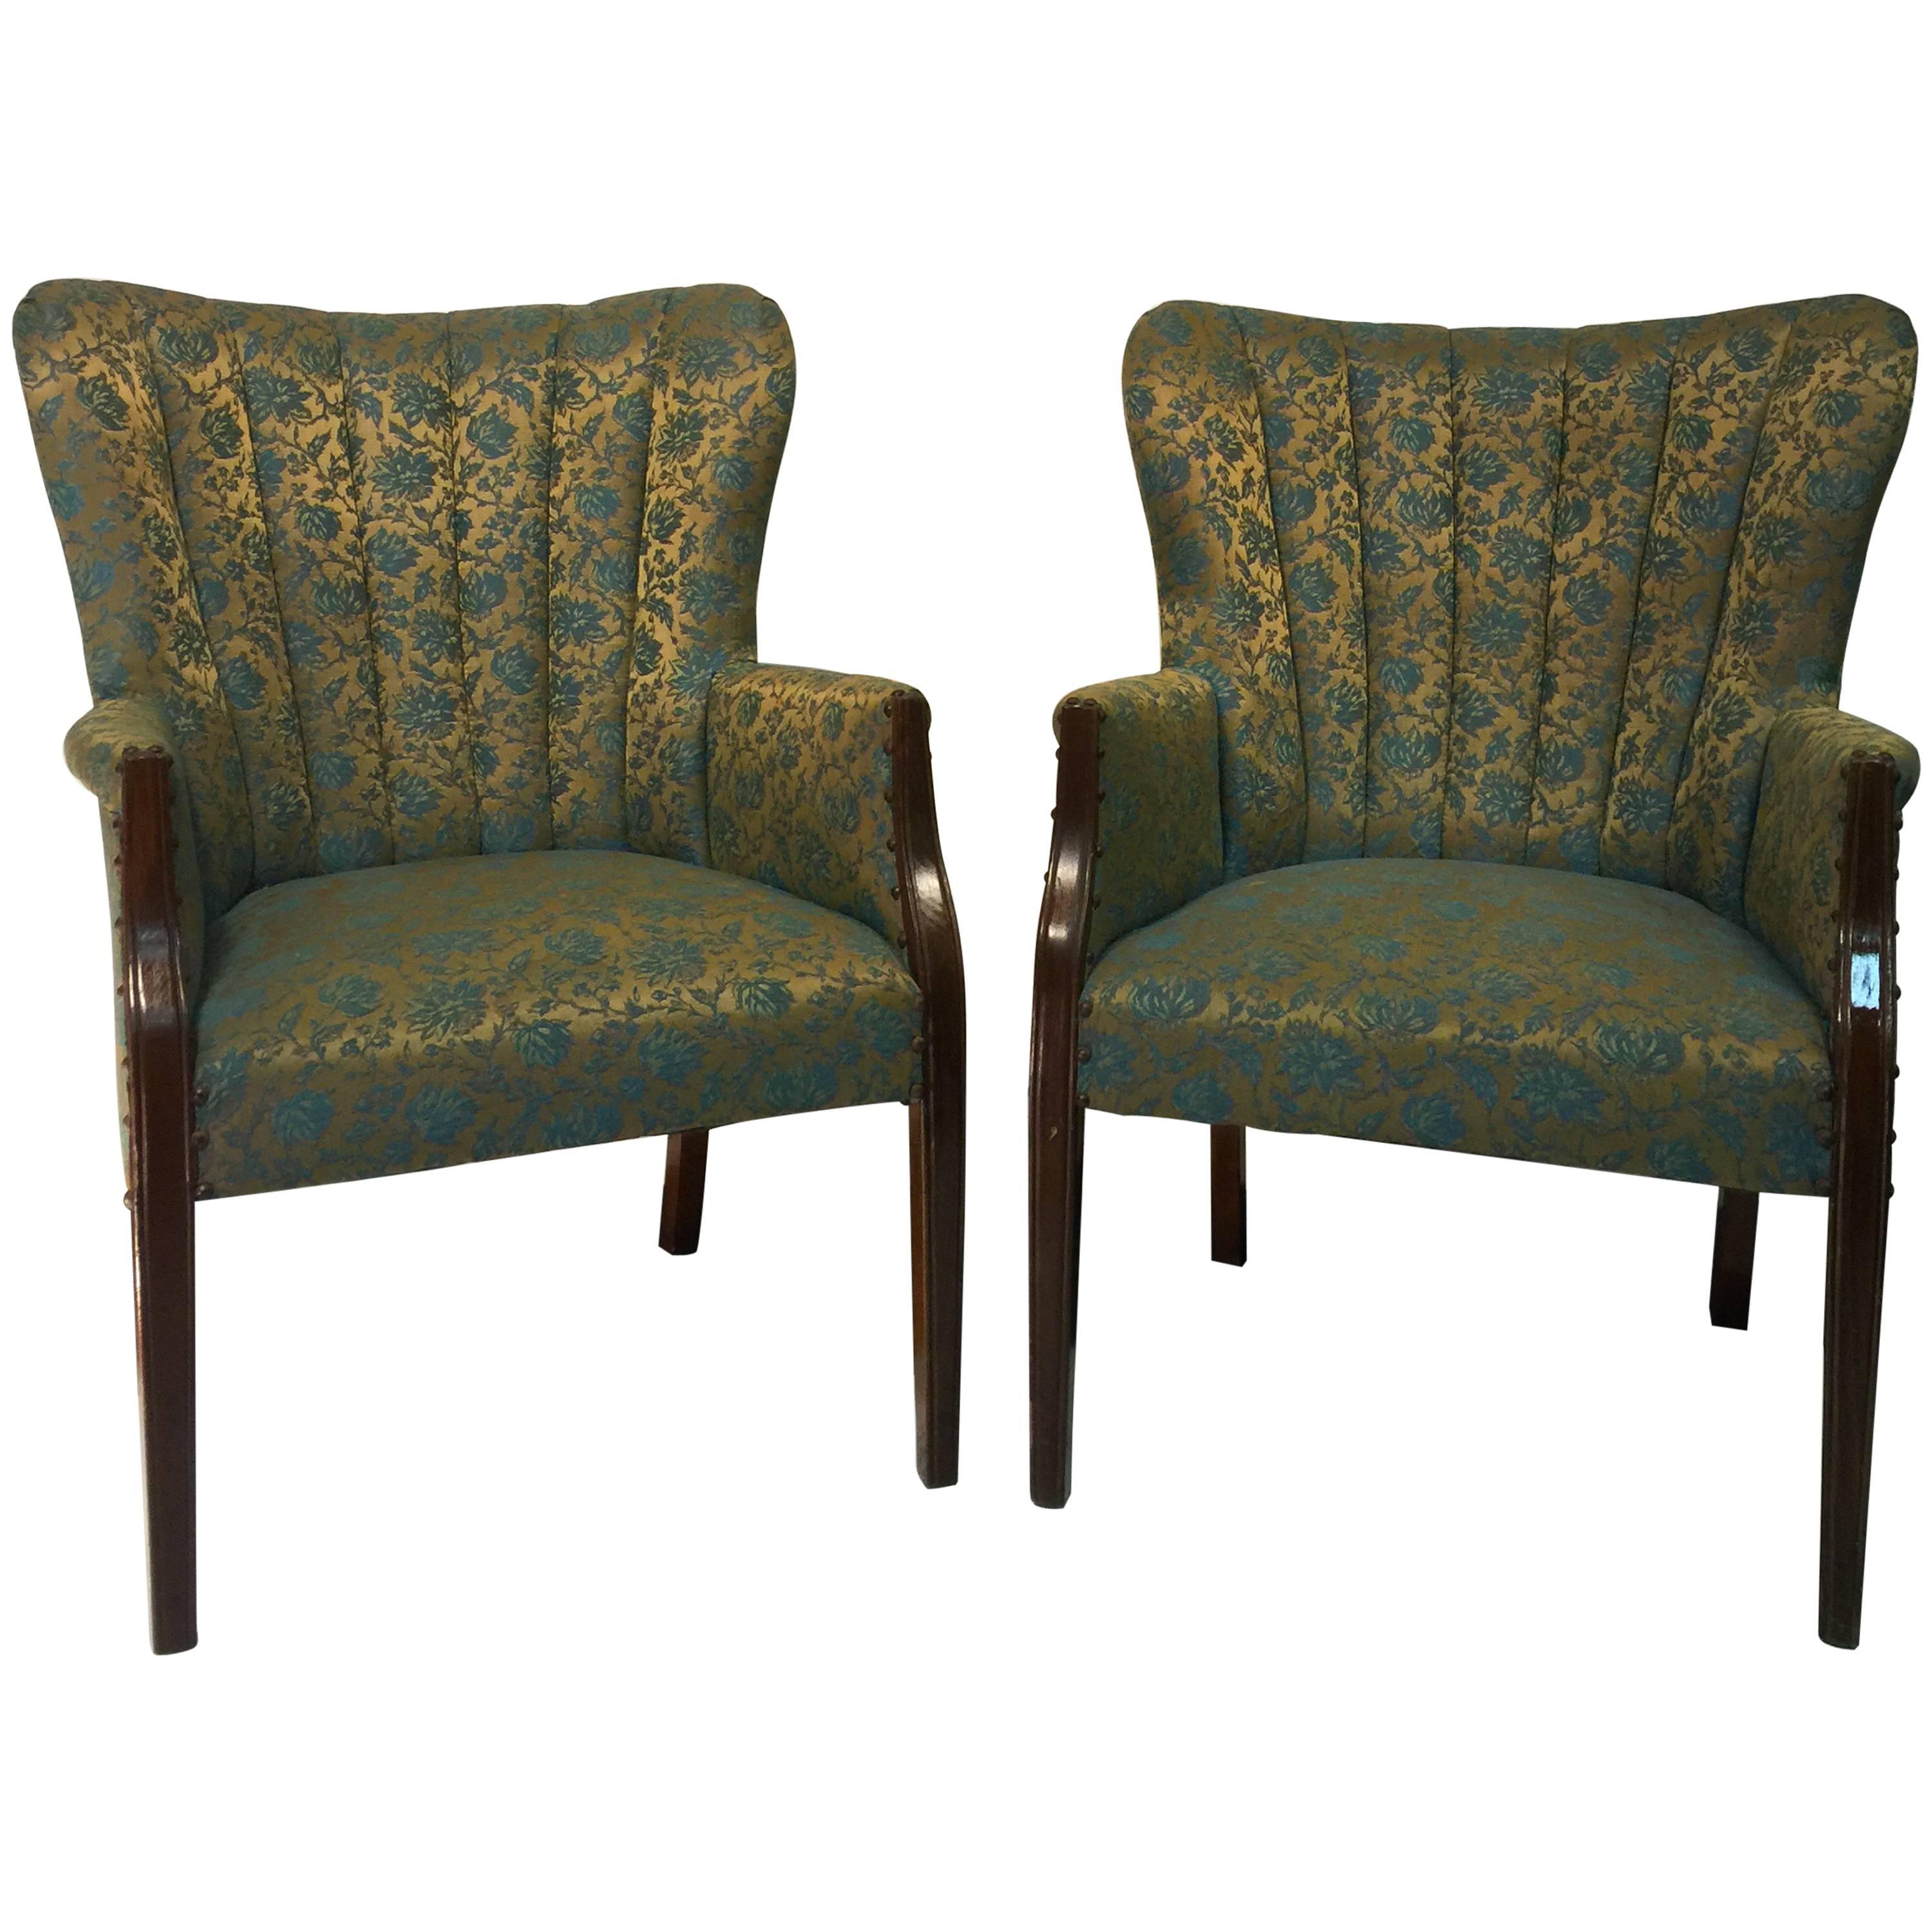 Hollywood Regency Pair of Dorothy Draper Style Fan Back Armchairs, circa 1940 For Sale